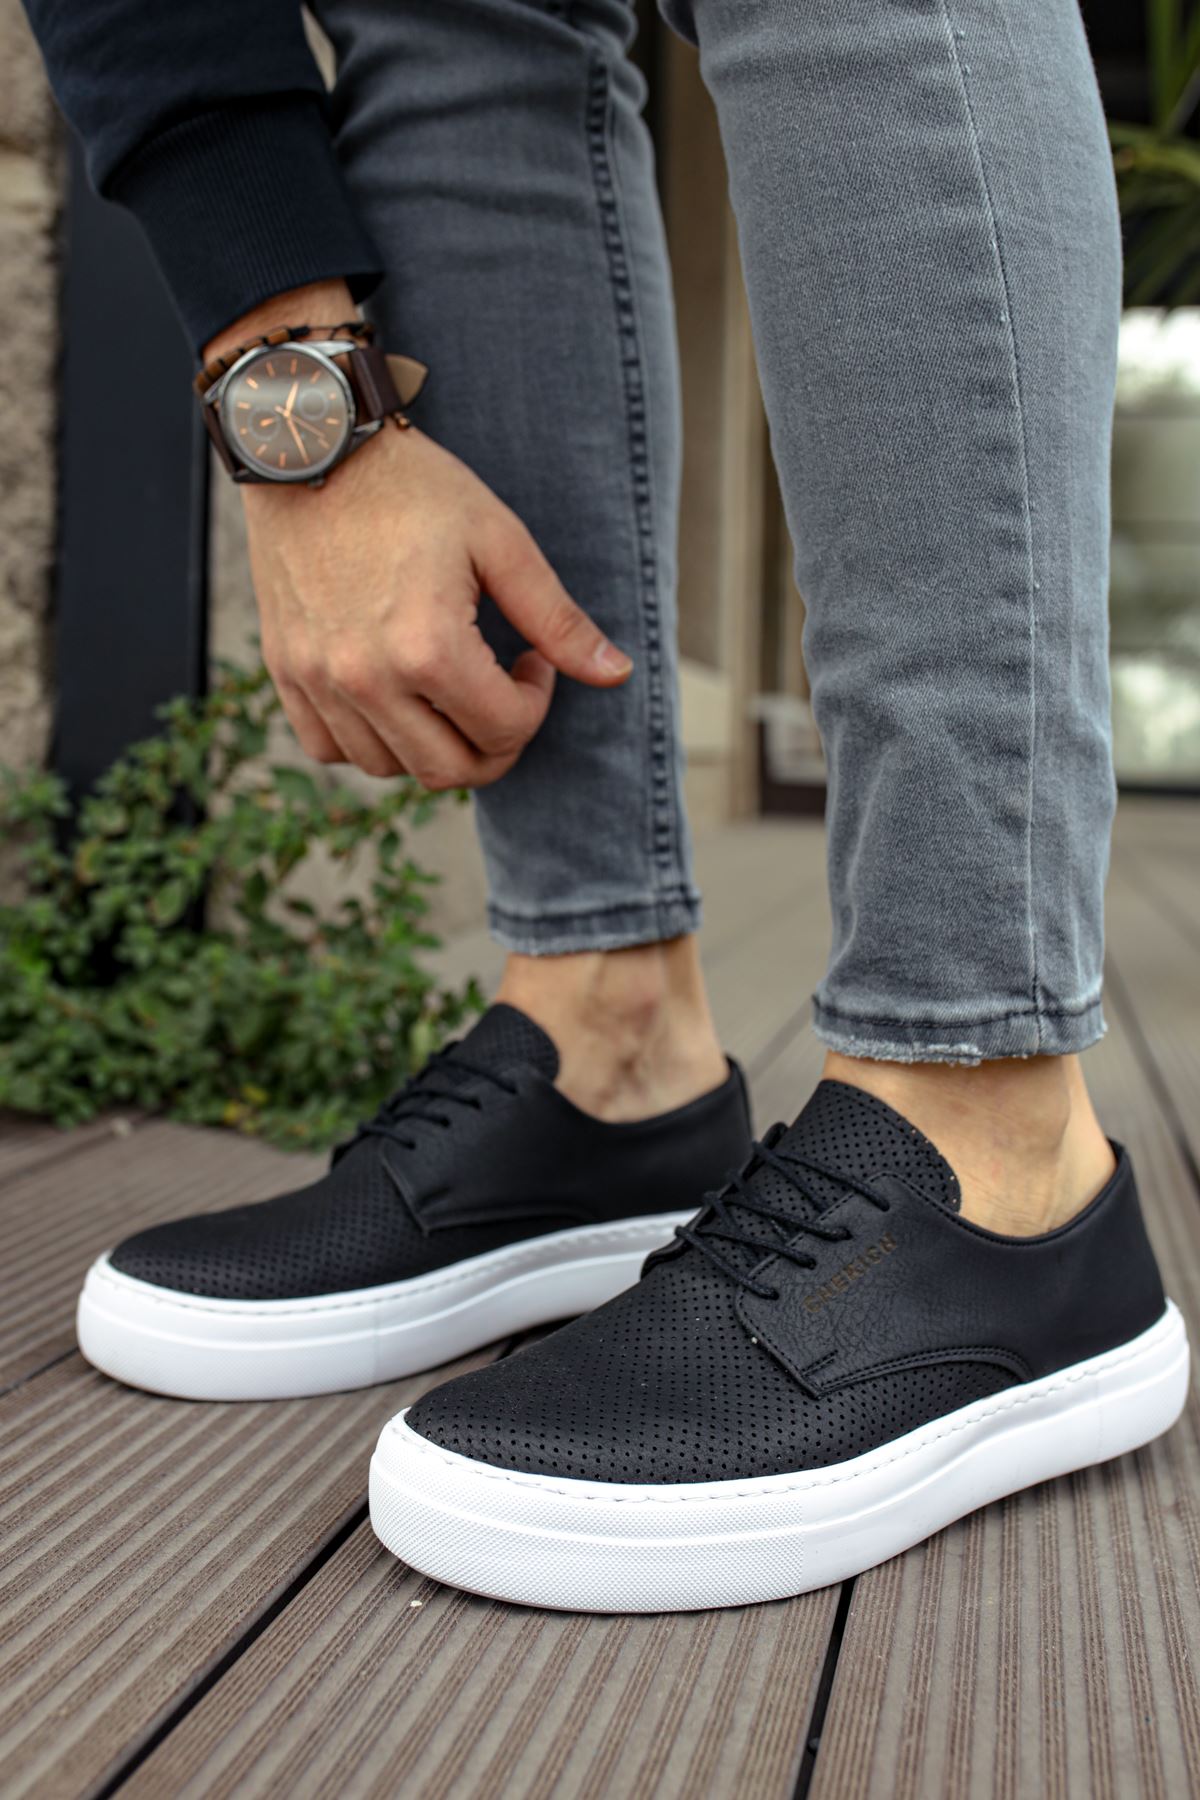 CH061 Men's Orthopedics Black-White Sole Lace-up Casual Sneaker Shoes - STREETMODE ™